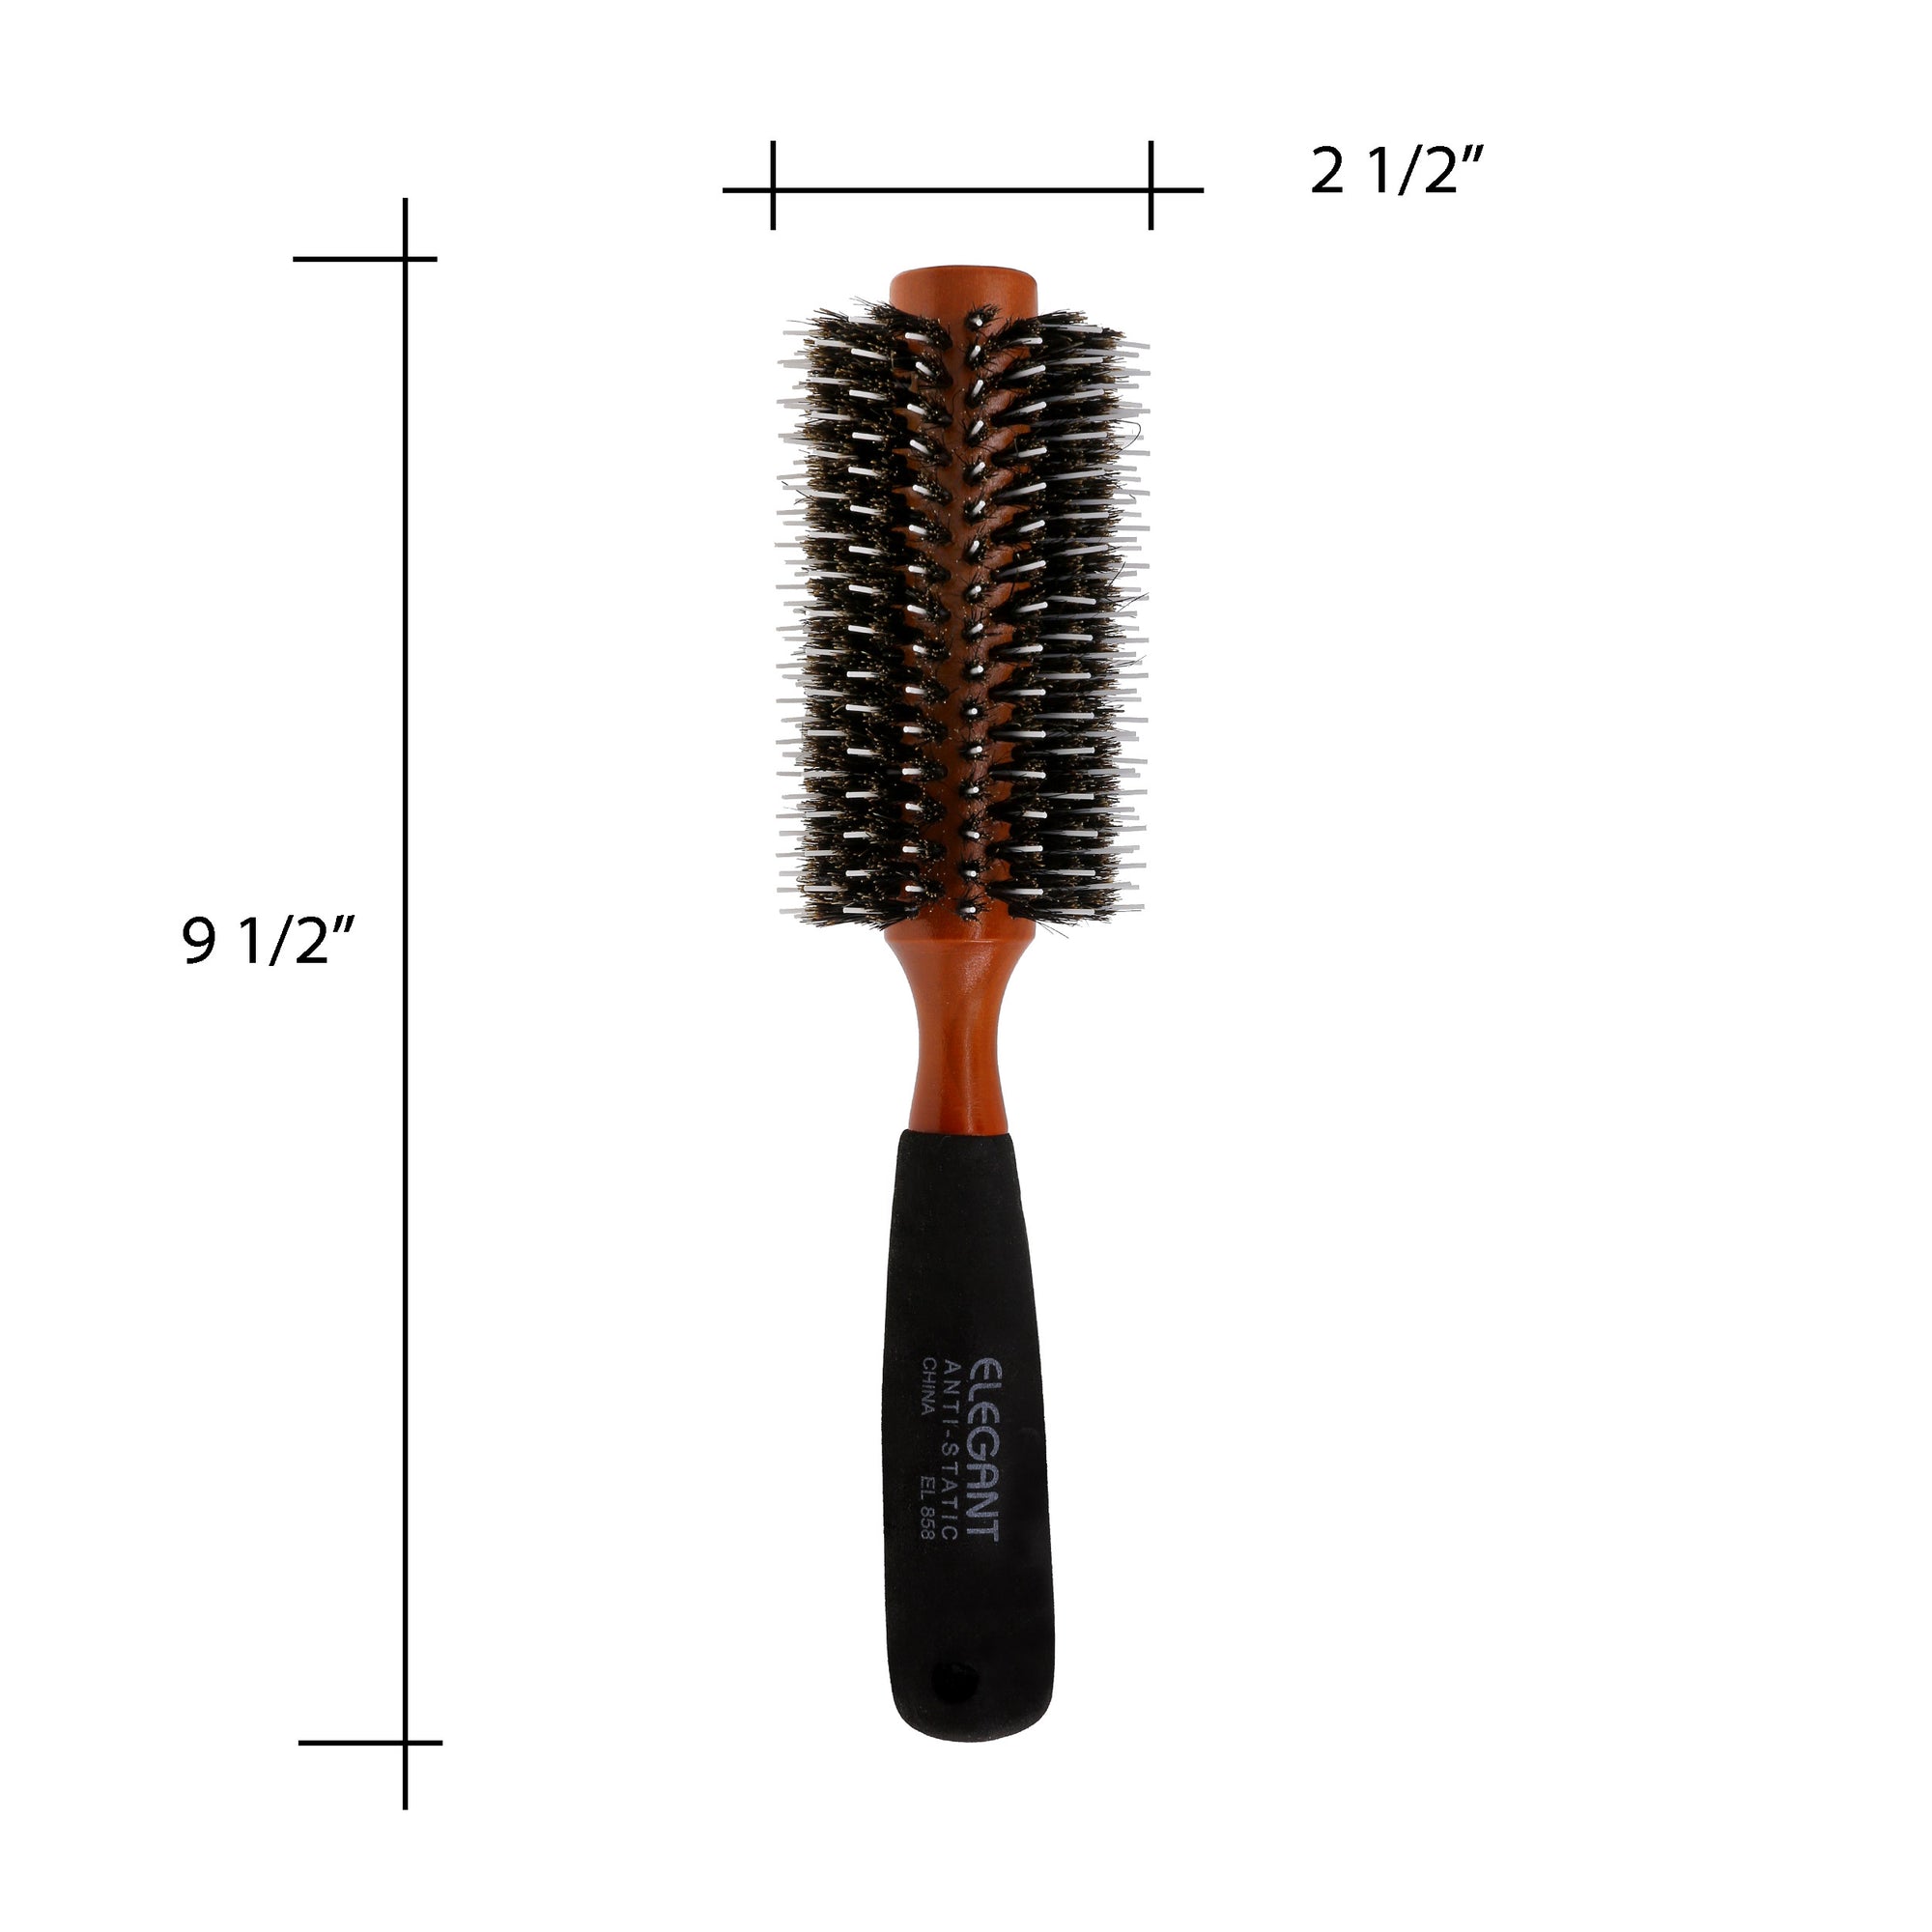 2.25" Nylon and Natural Bristle Round Hair Brush with Foam Handle